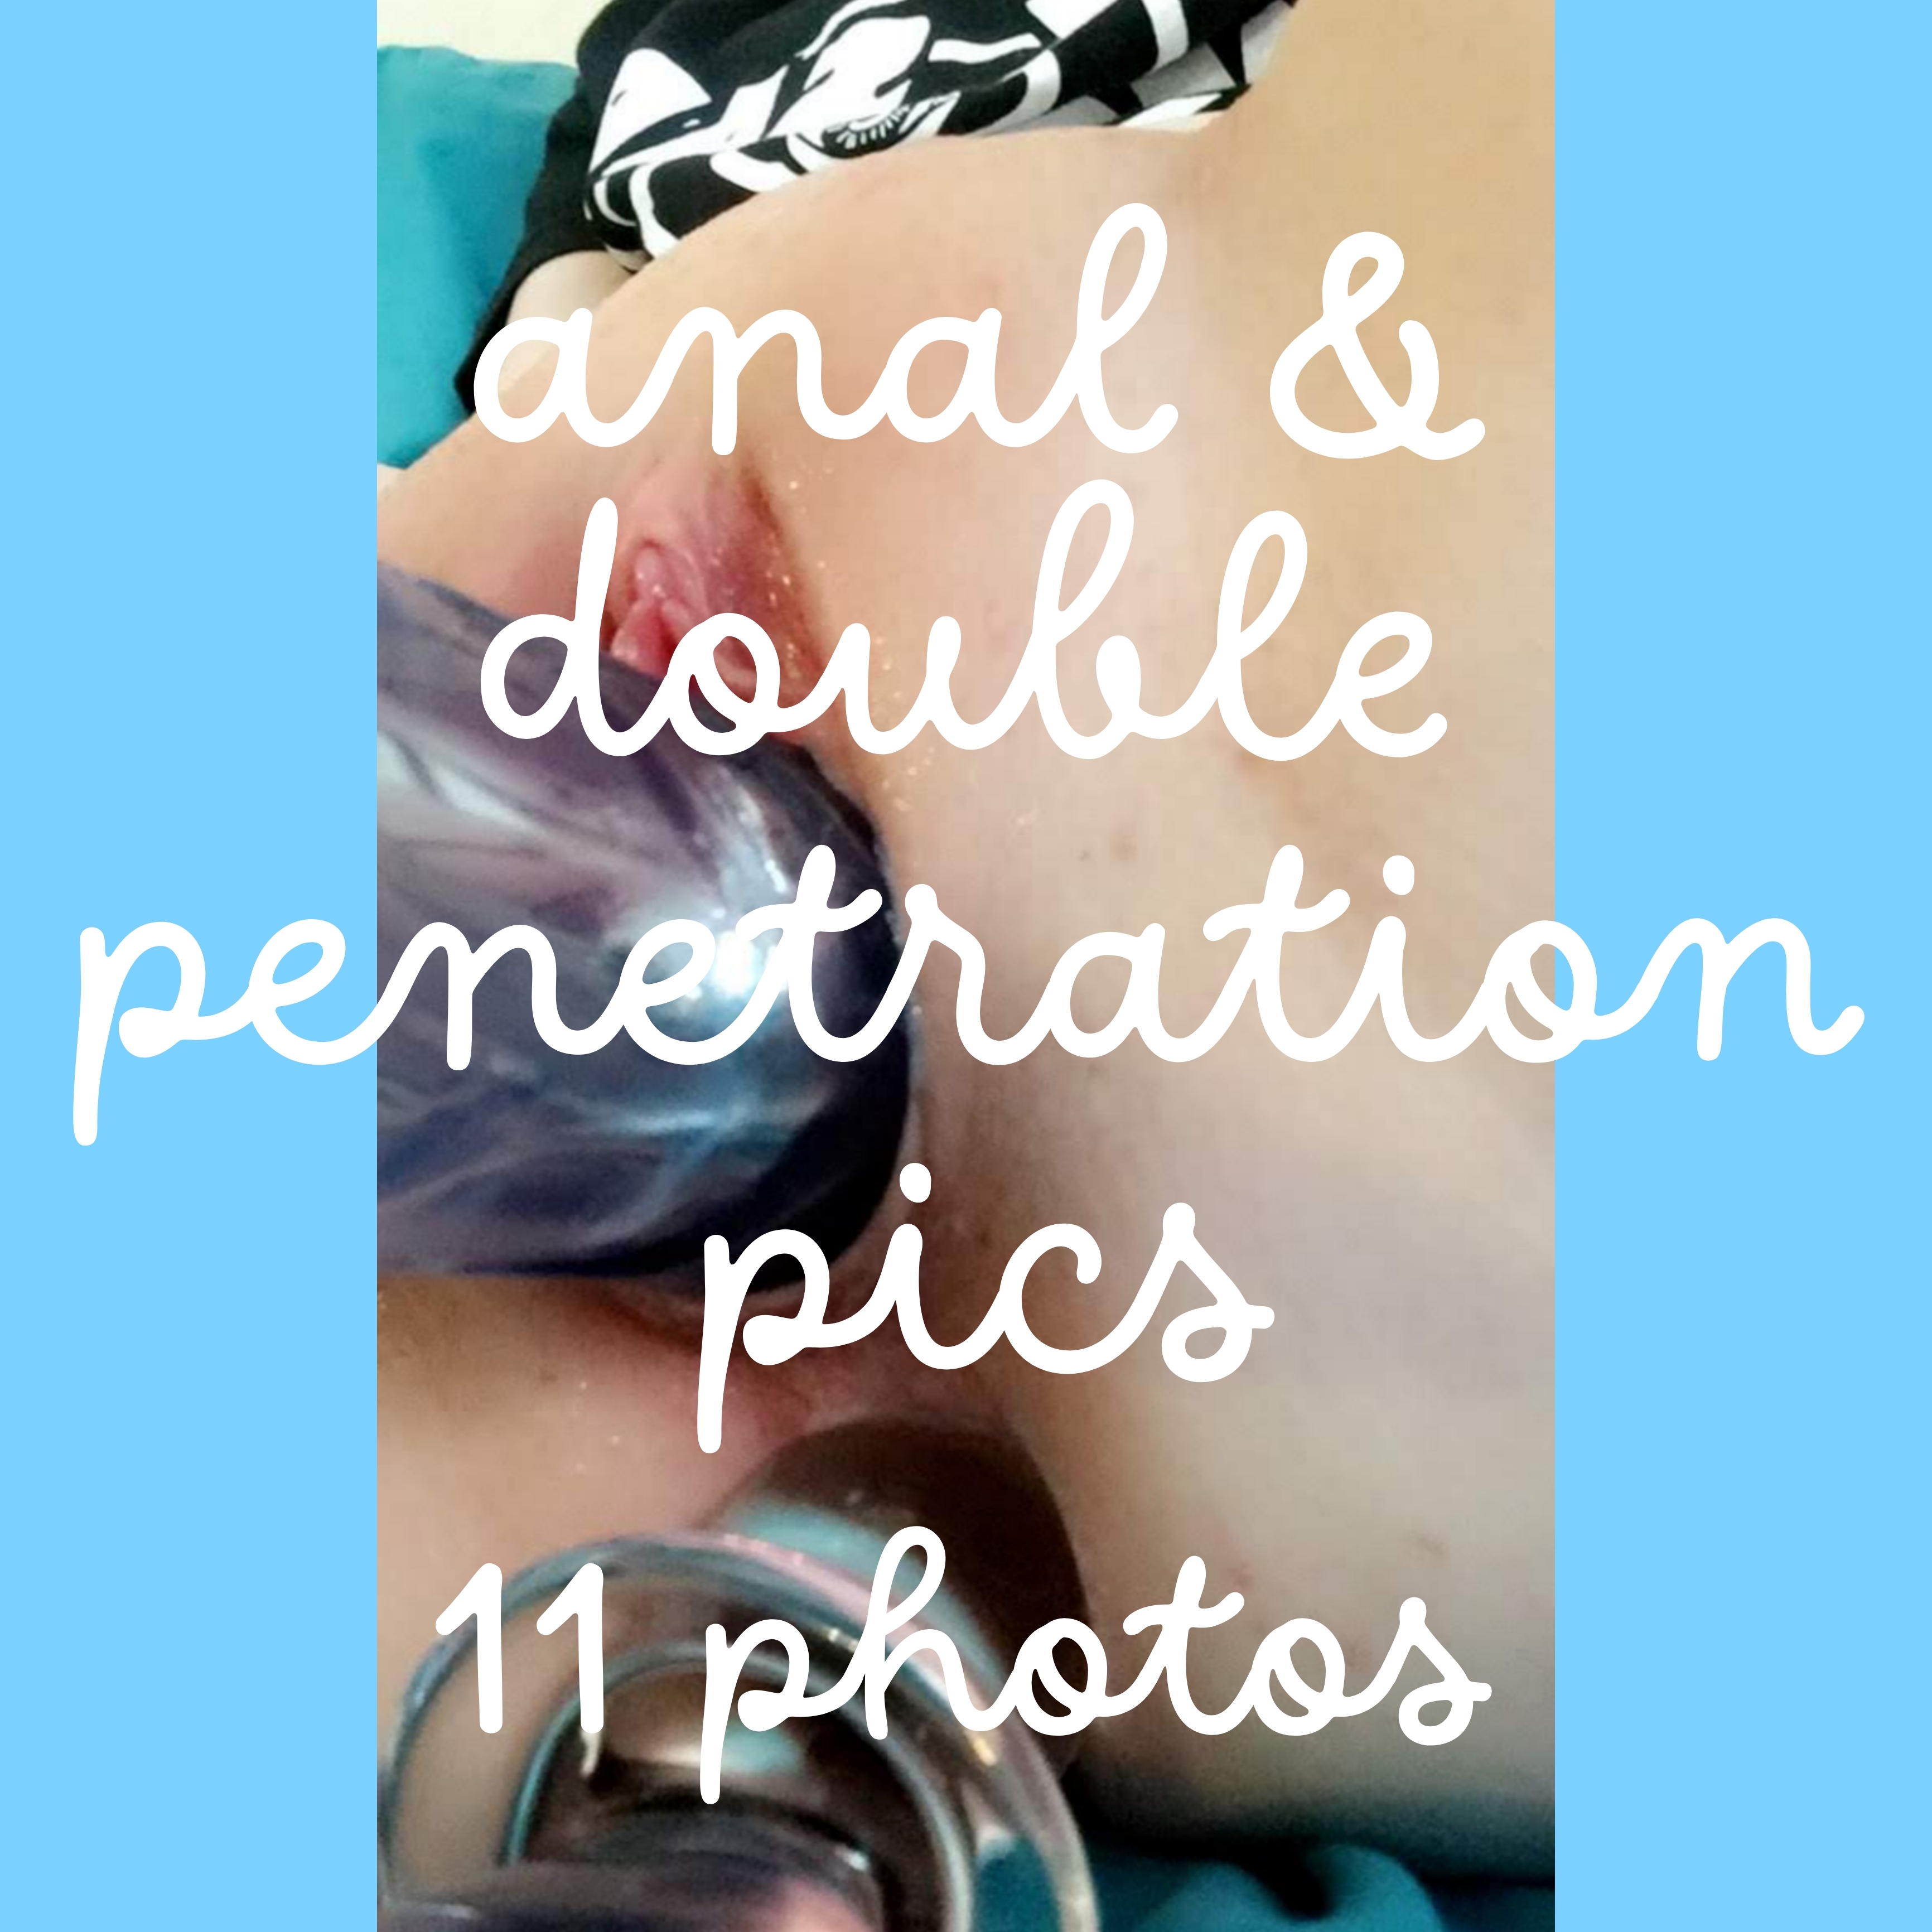 anal and dp pics photo gallery by Squeezypeach